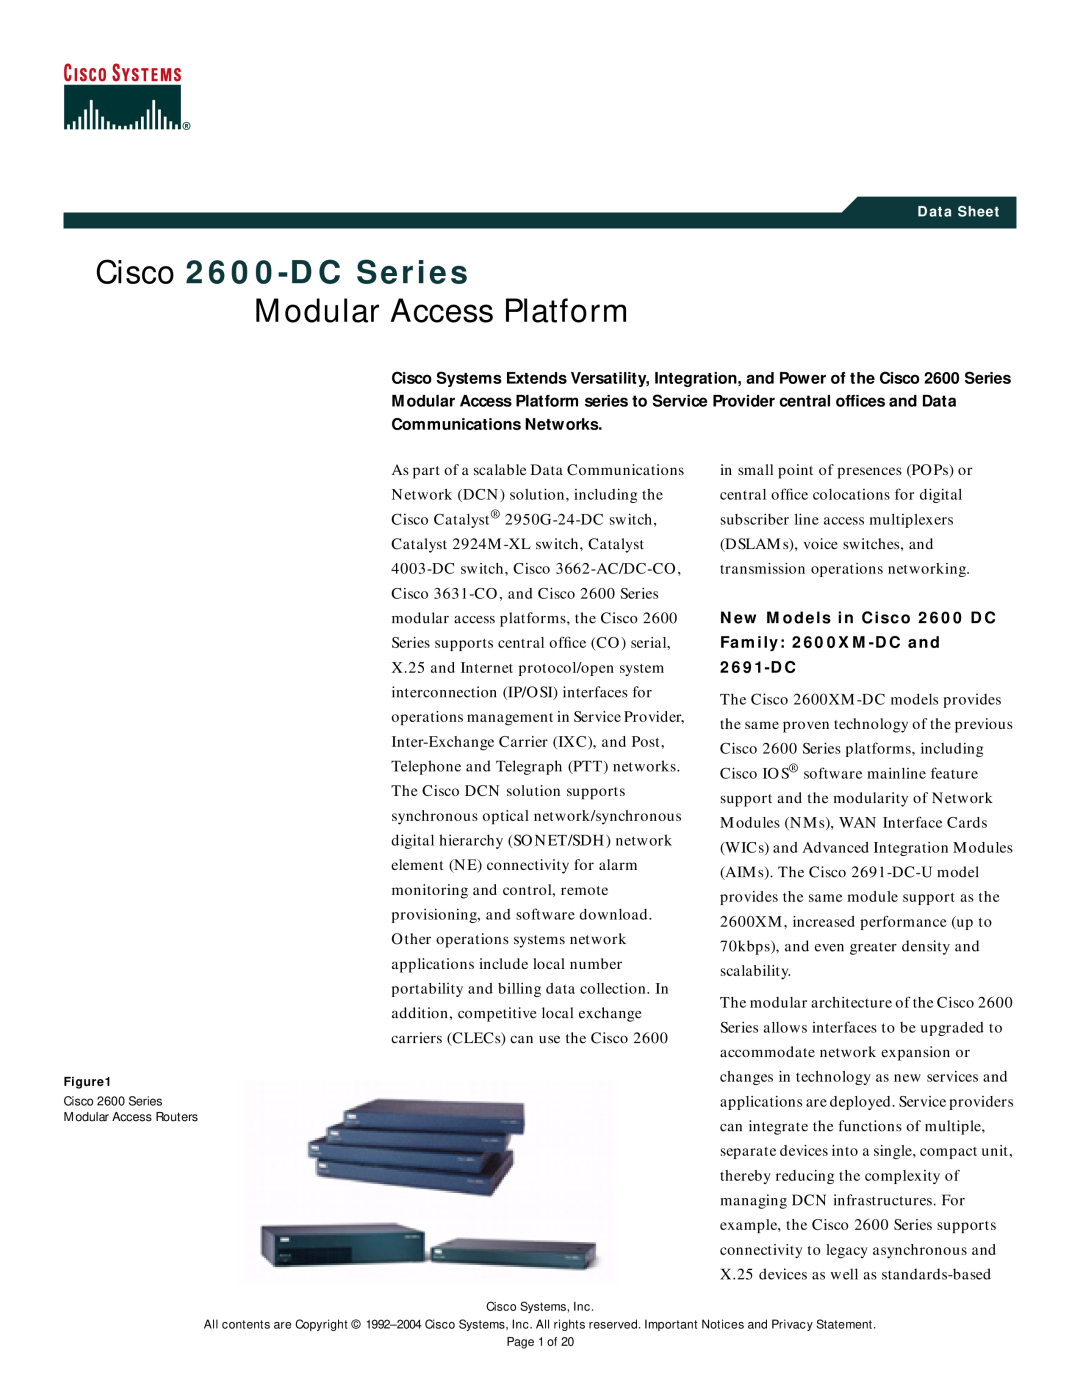 Cisco Systems 2600-DC Series manual Communications Networks, New Models in Cisco 2600 DC Family 2600XM-DC and 2691-DC 